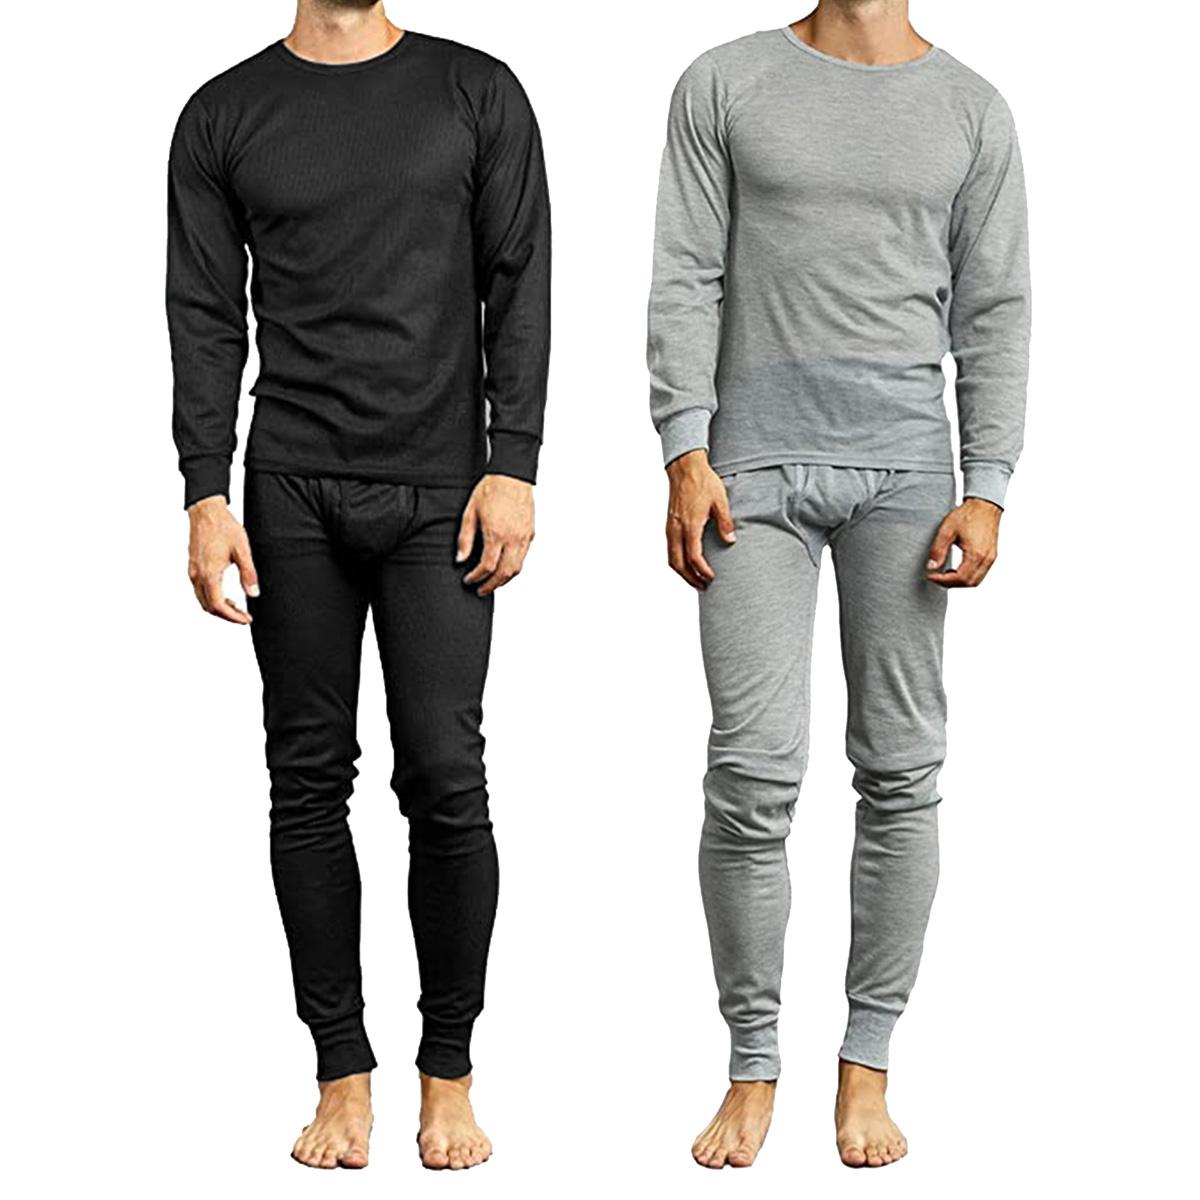 Galaxy By Harvic 4-Piece Mens Winter Thermal Base Layer Set Deals